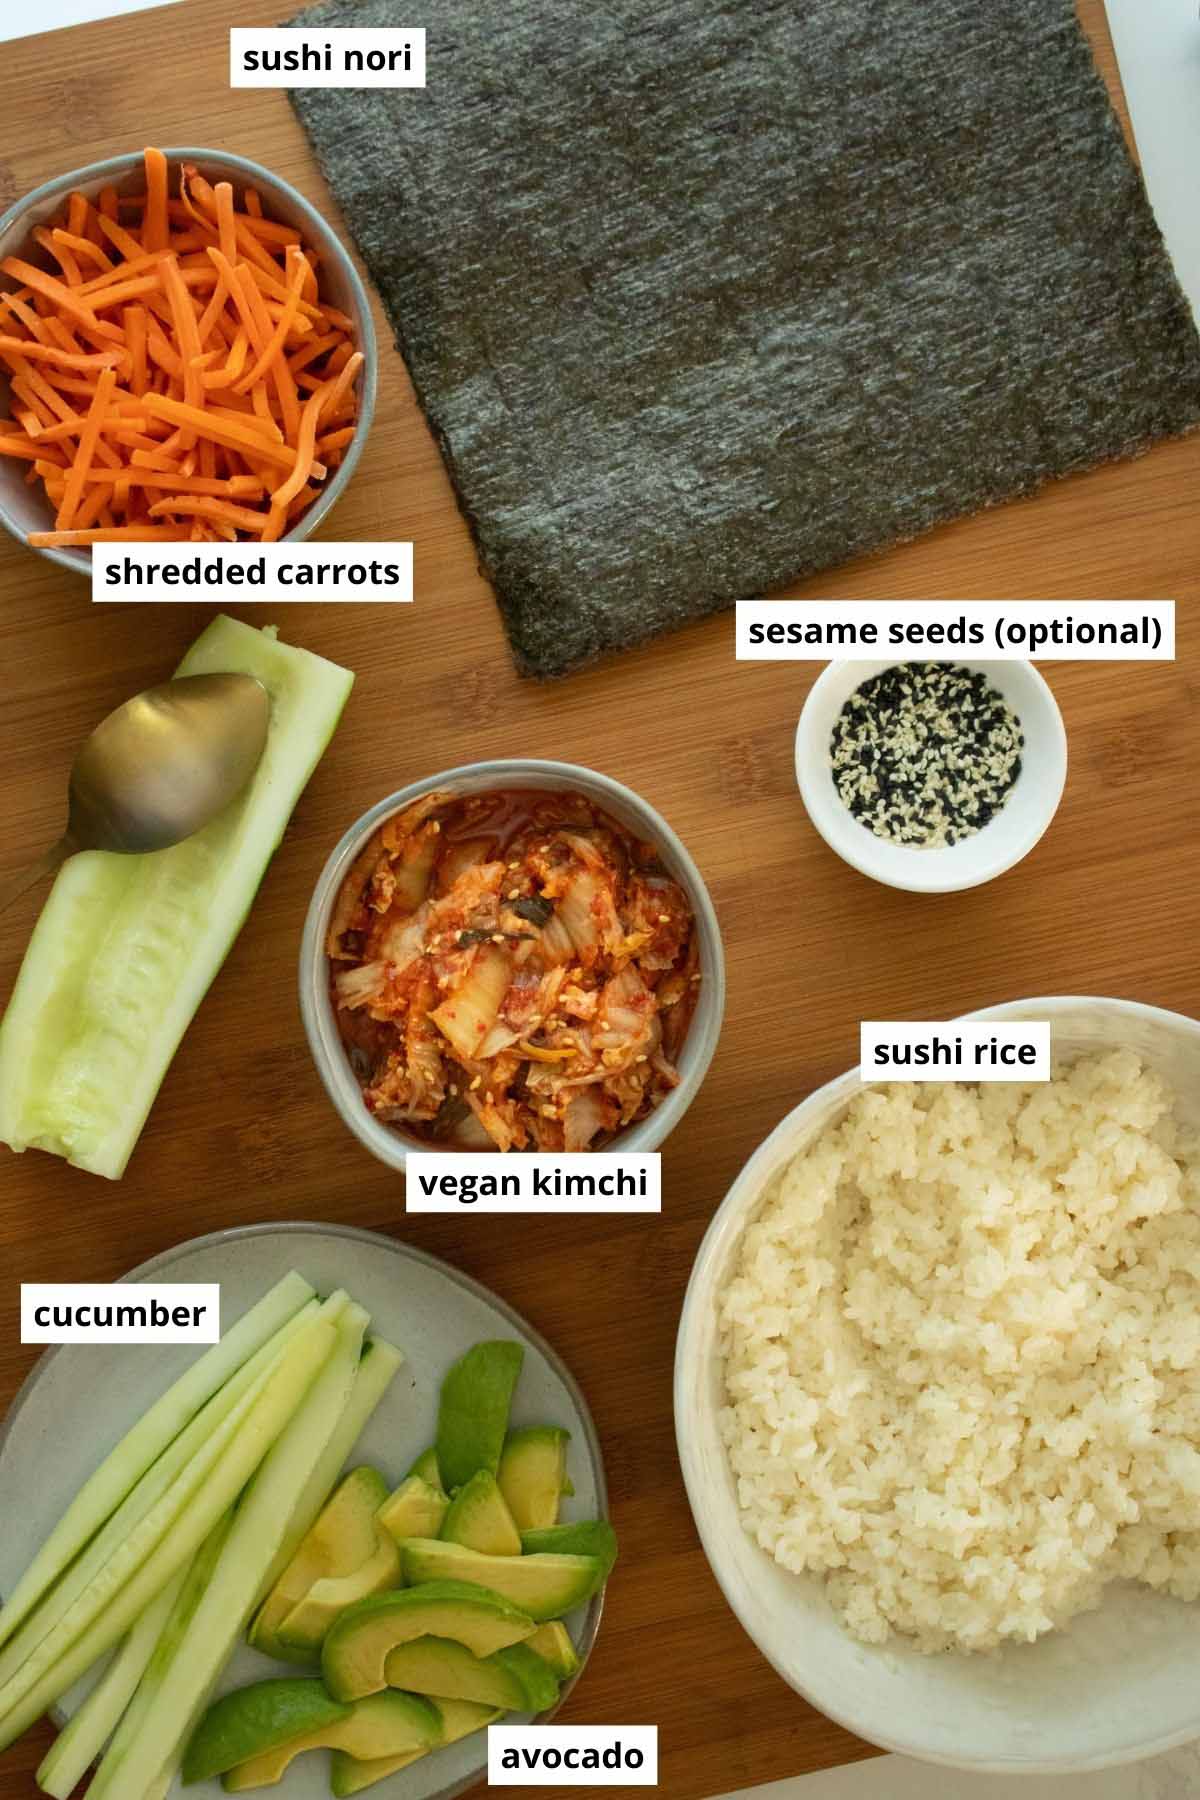 kimchi, sushi rice, nori sheets, sesame seeds, and veggies arranged on a wooden cutting board